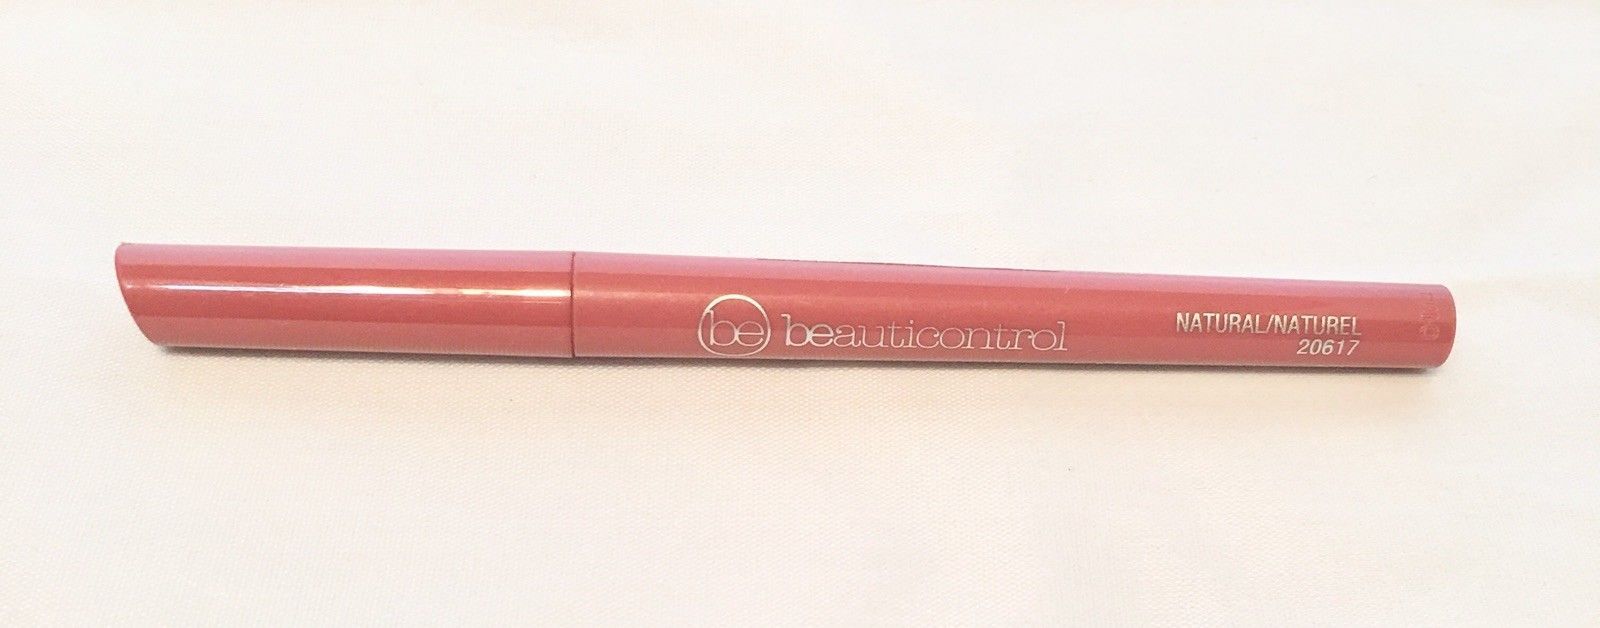 Beauticontrol Lip Perfecting Pencil Natural .01 OZ. Waterproof With Vitamins A&C